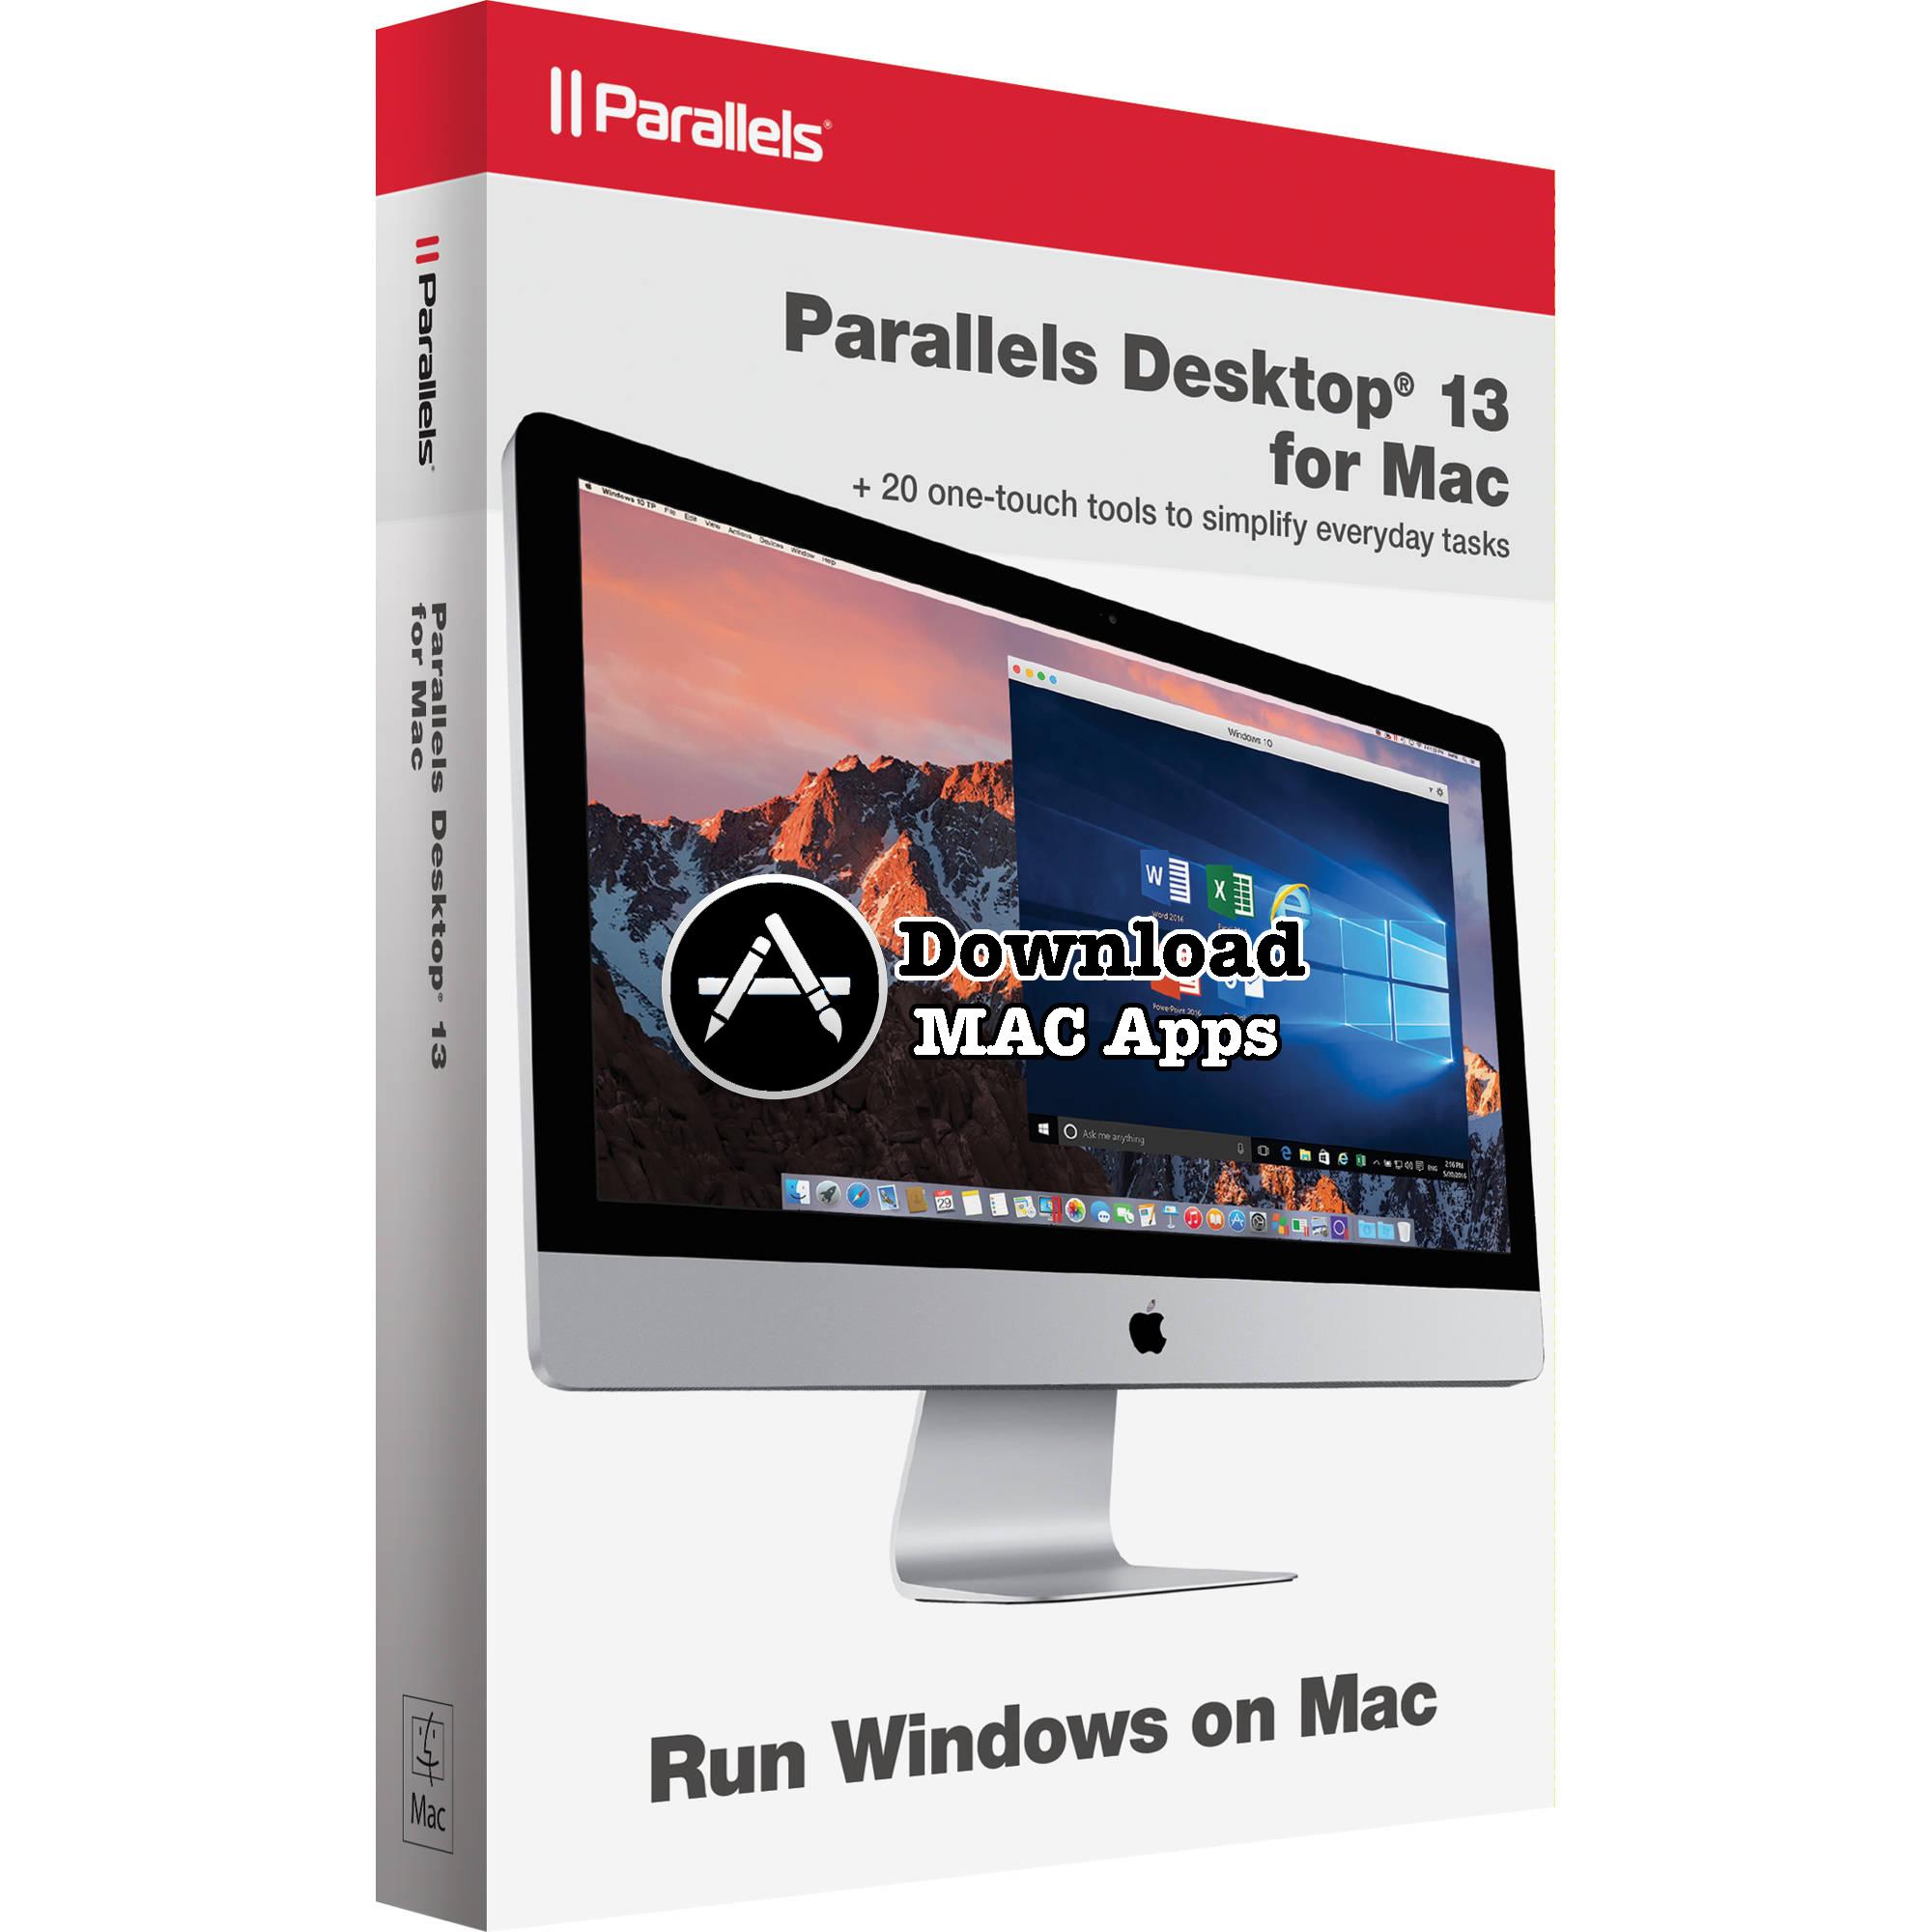 Parallel Windows 7 For Mac Free Download